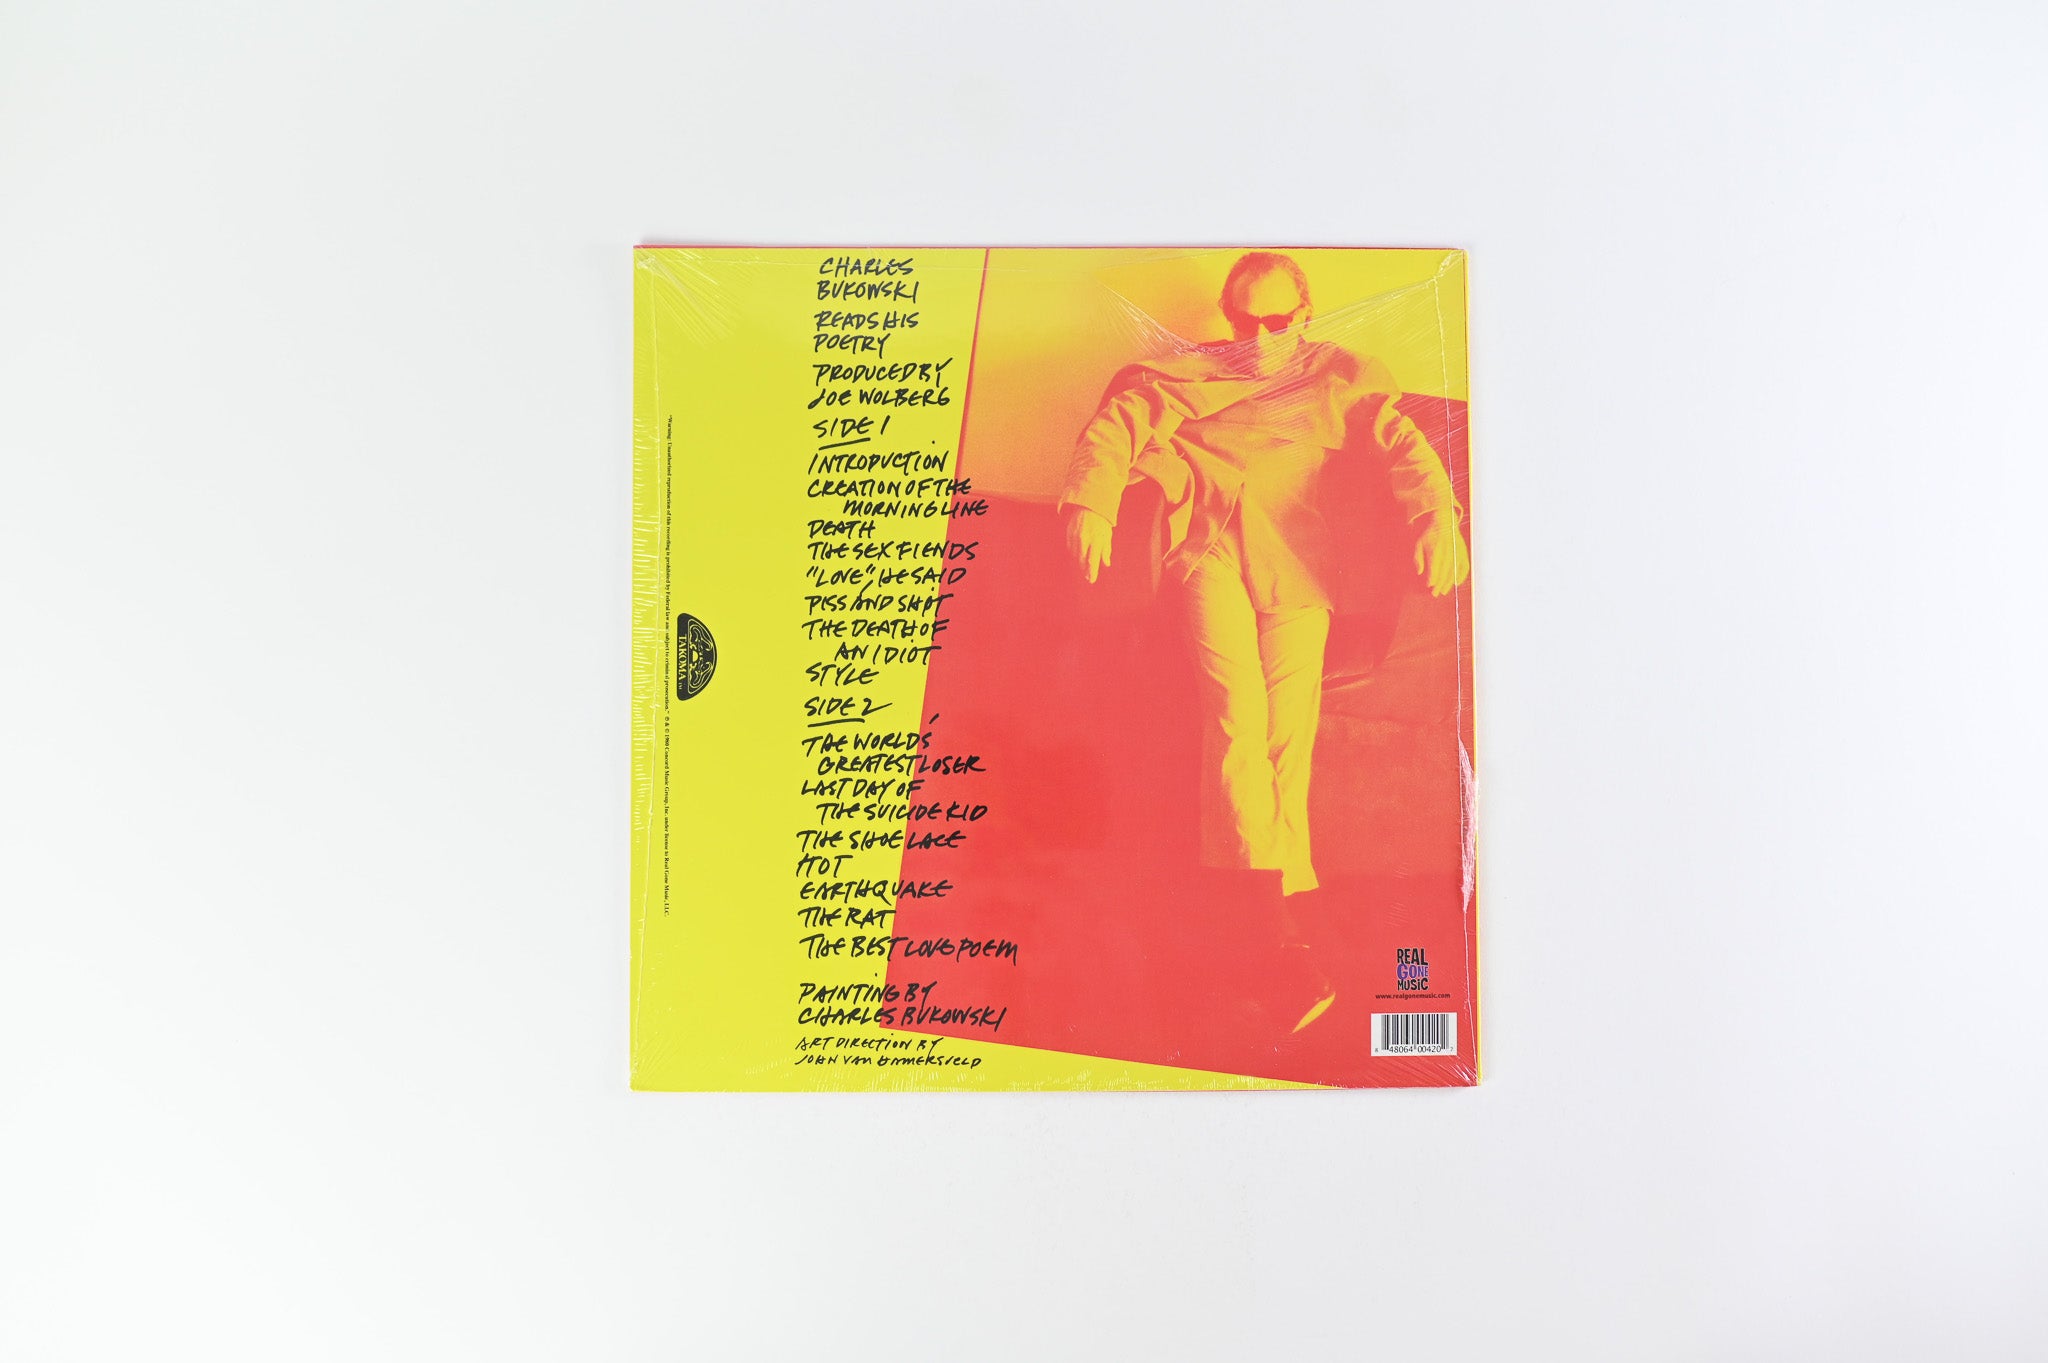 Charles Bukowski - Reads His Poetry on Real Gone Yellow Sealed